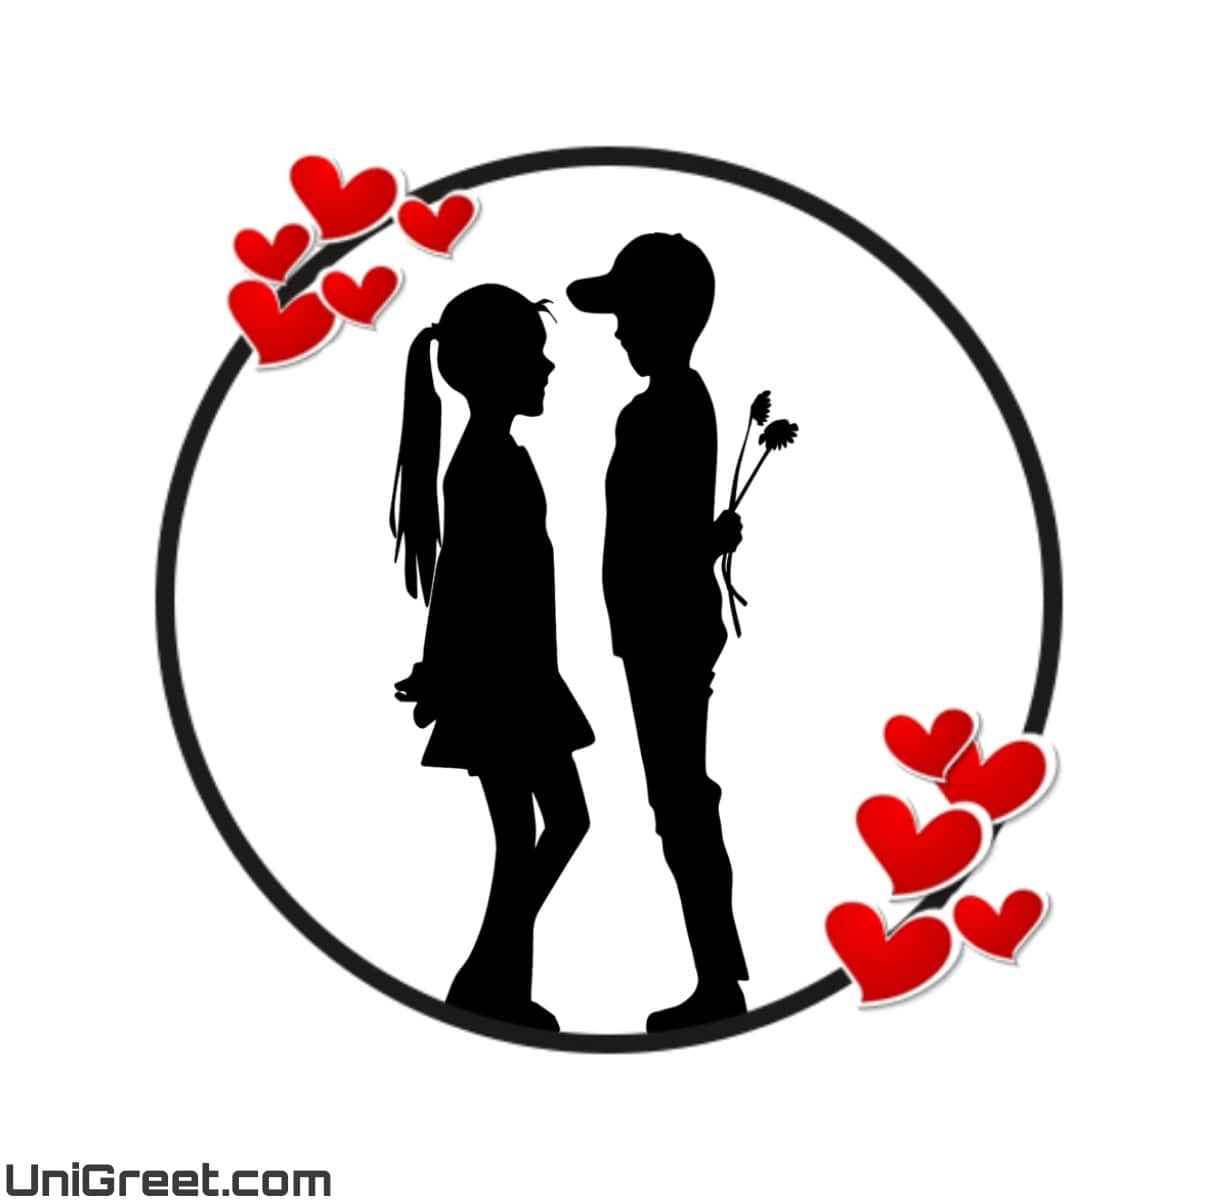 New Love WhatsApp﻿ Dp Images Pics Photos Free Download For Whatsapp, Fb, Instagram Love Dp Pic